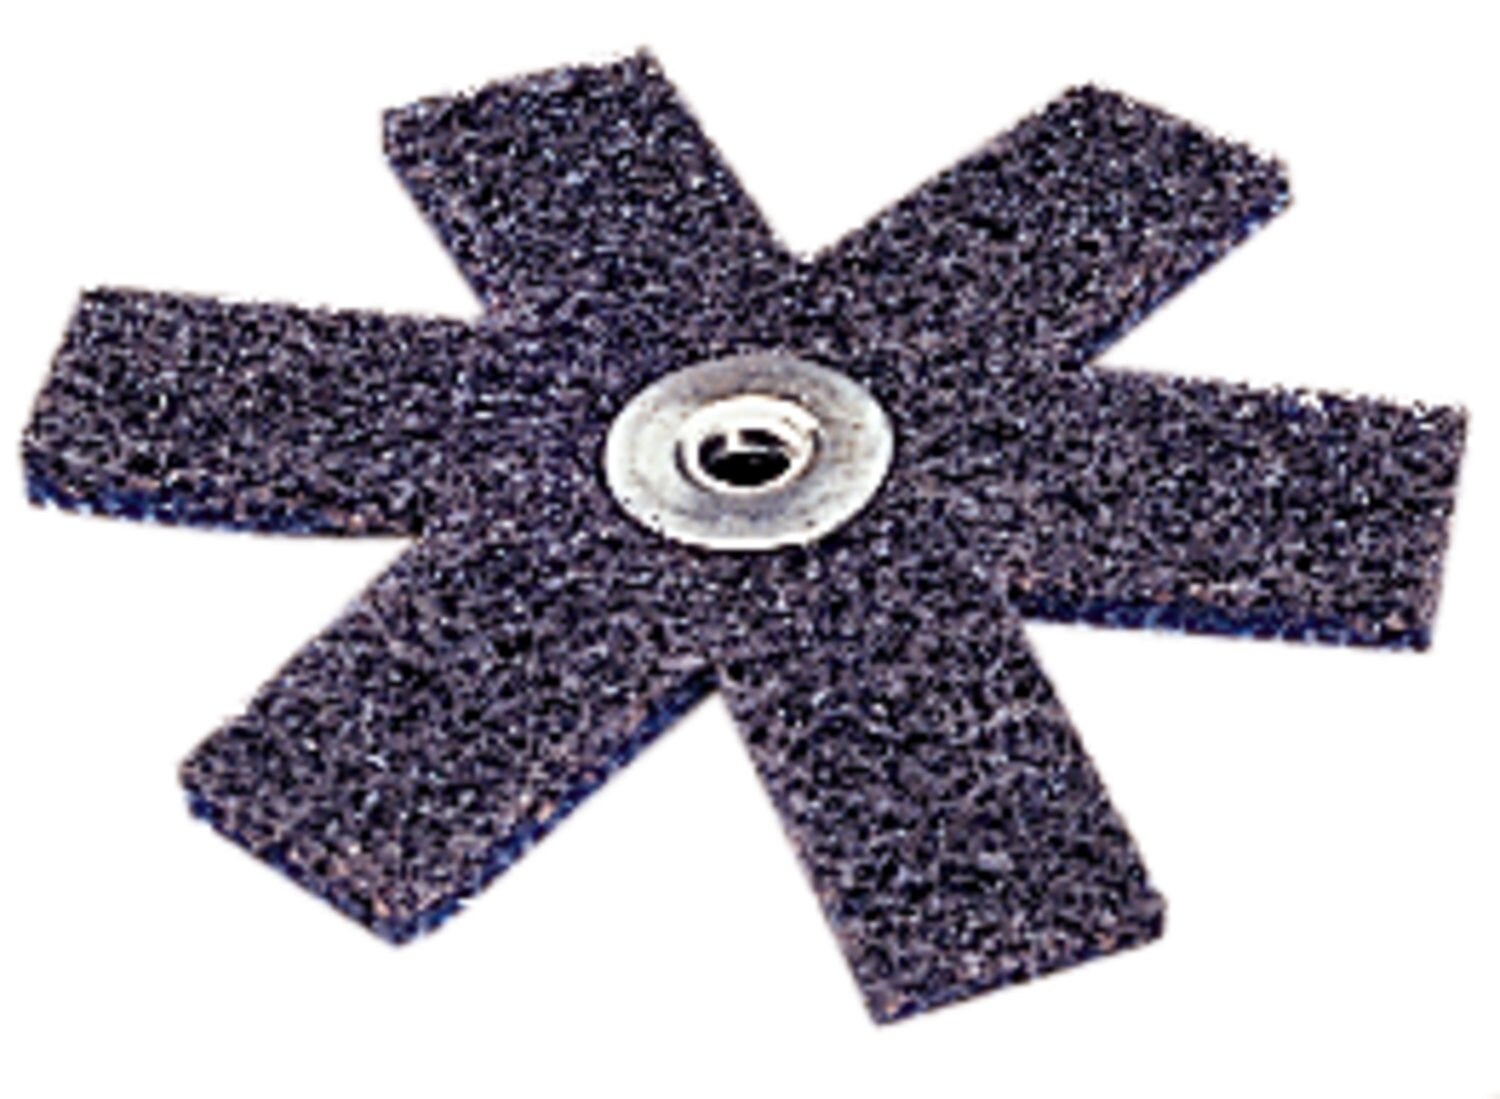 7010310484 - Standard Abrasives Surface Conditioning Star 724607, 2 in x 1/4-20 VFN,
50 ea/Case